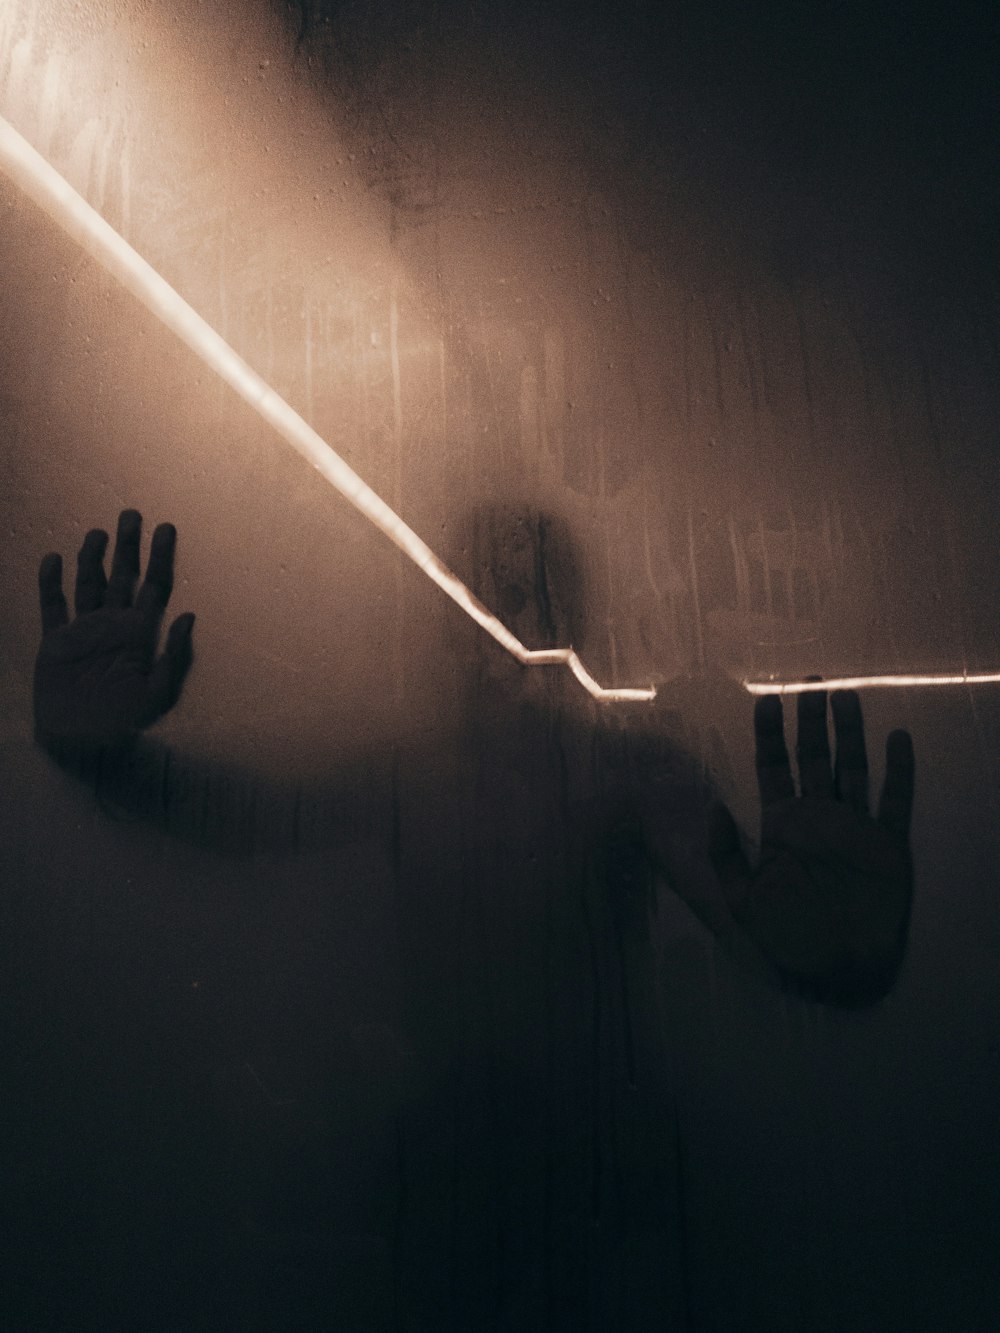 persons hand on white wall